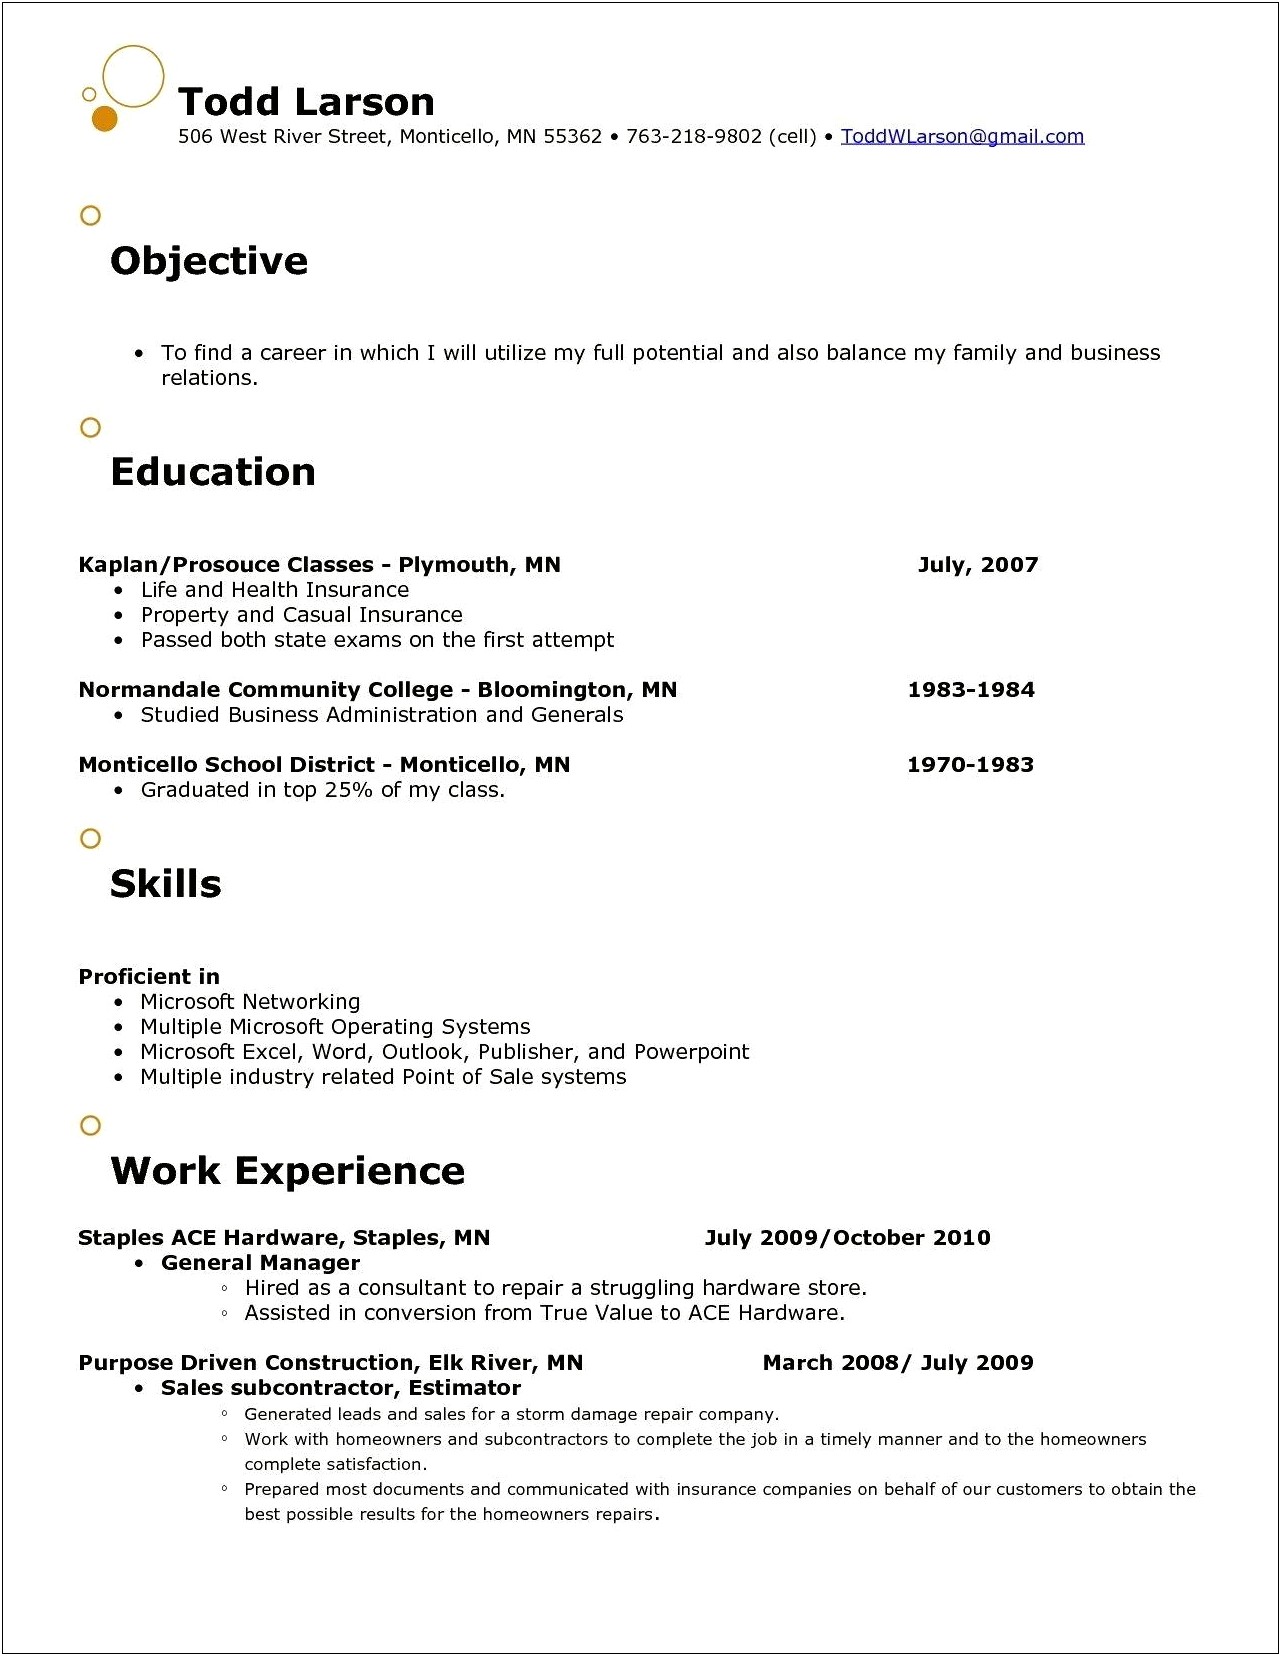 Pharmaceutical Industry Resume Objective Statement